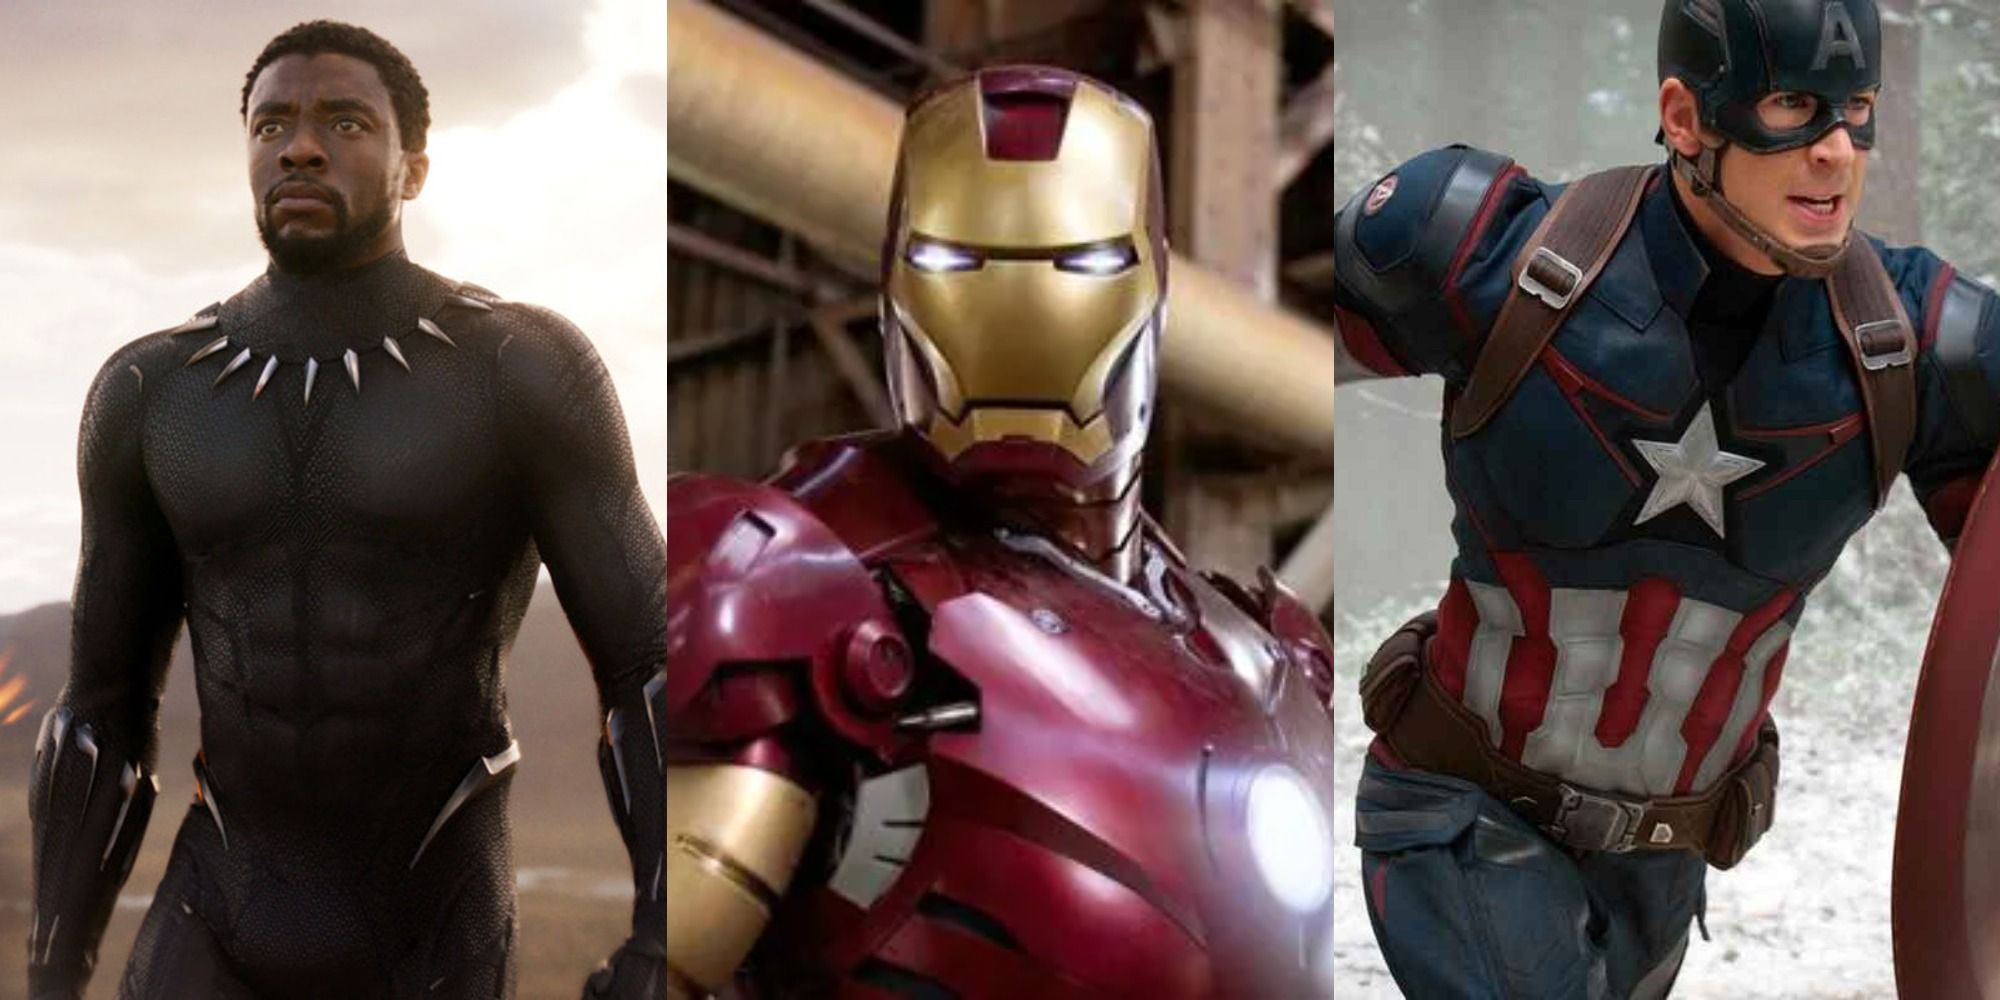 A split image of Black Panther, Iron Man, and Captain America